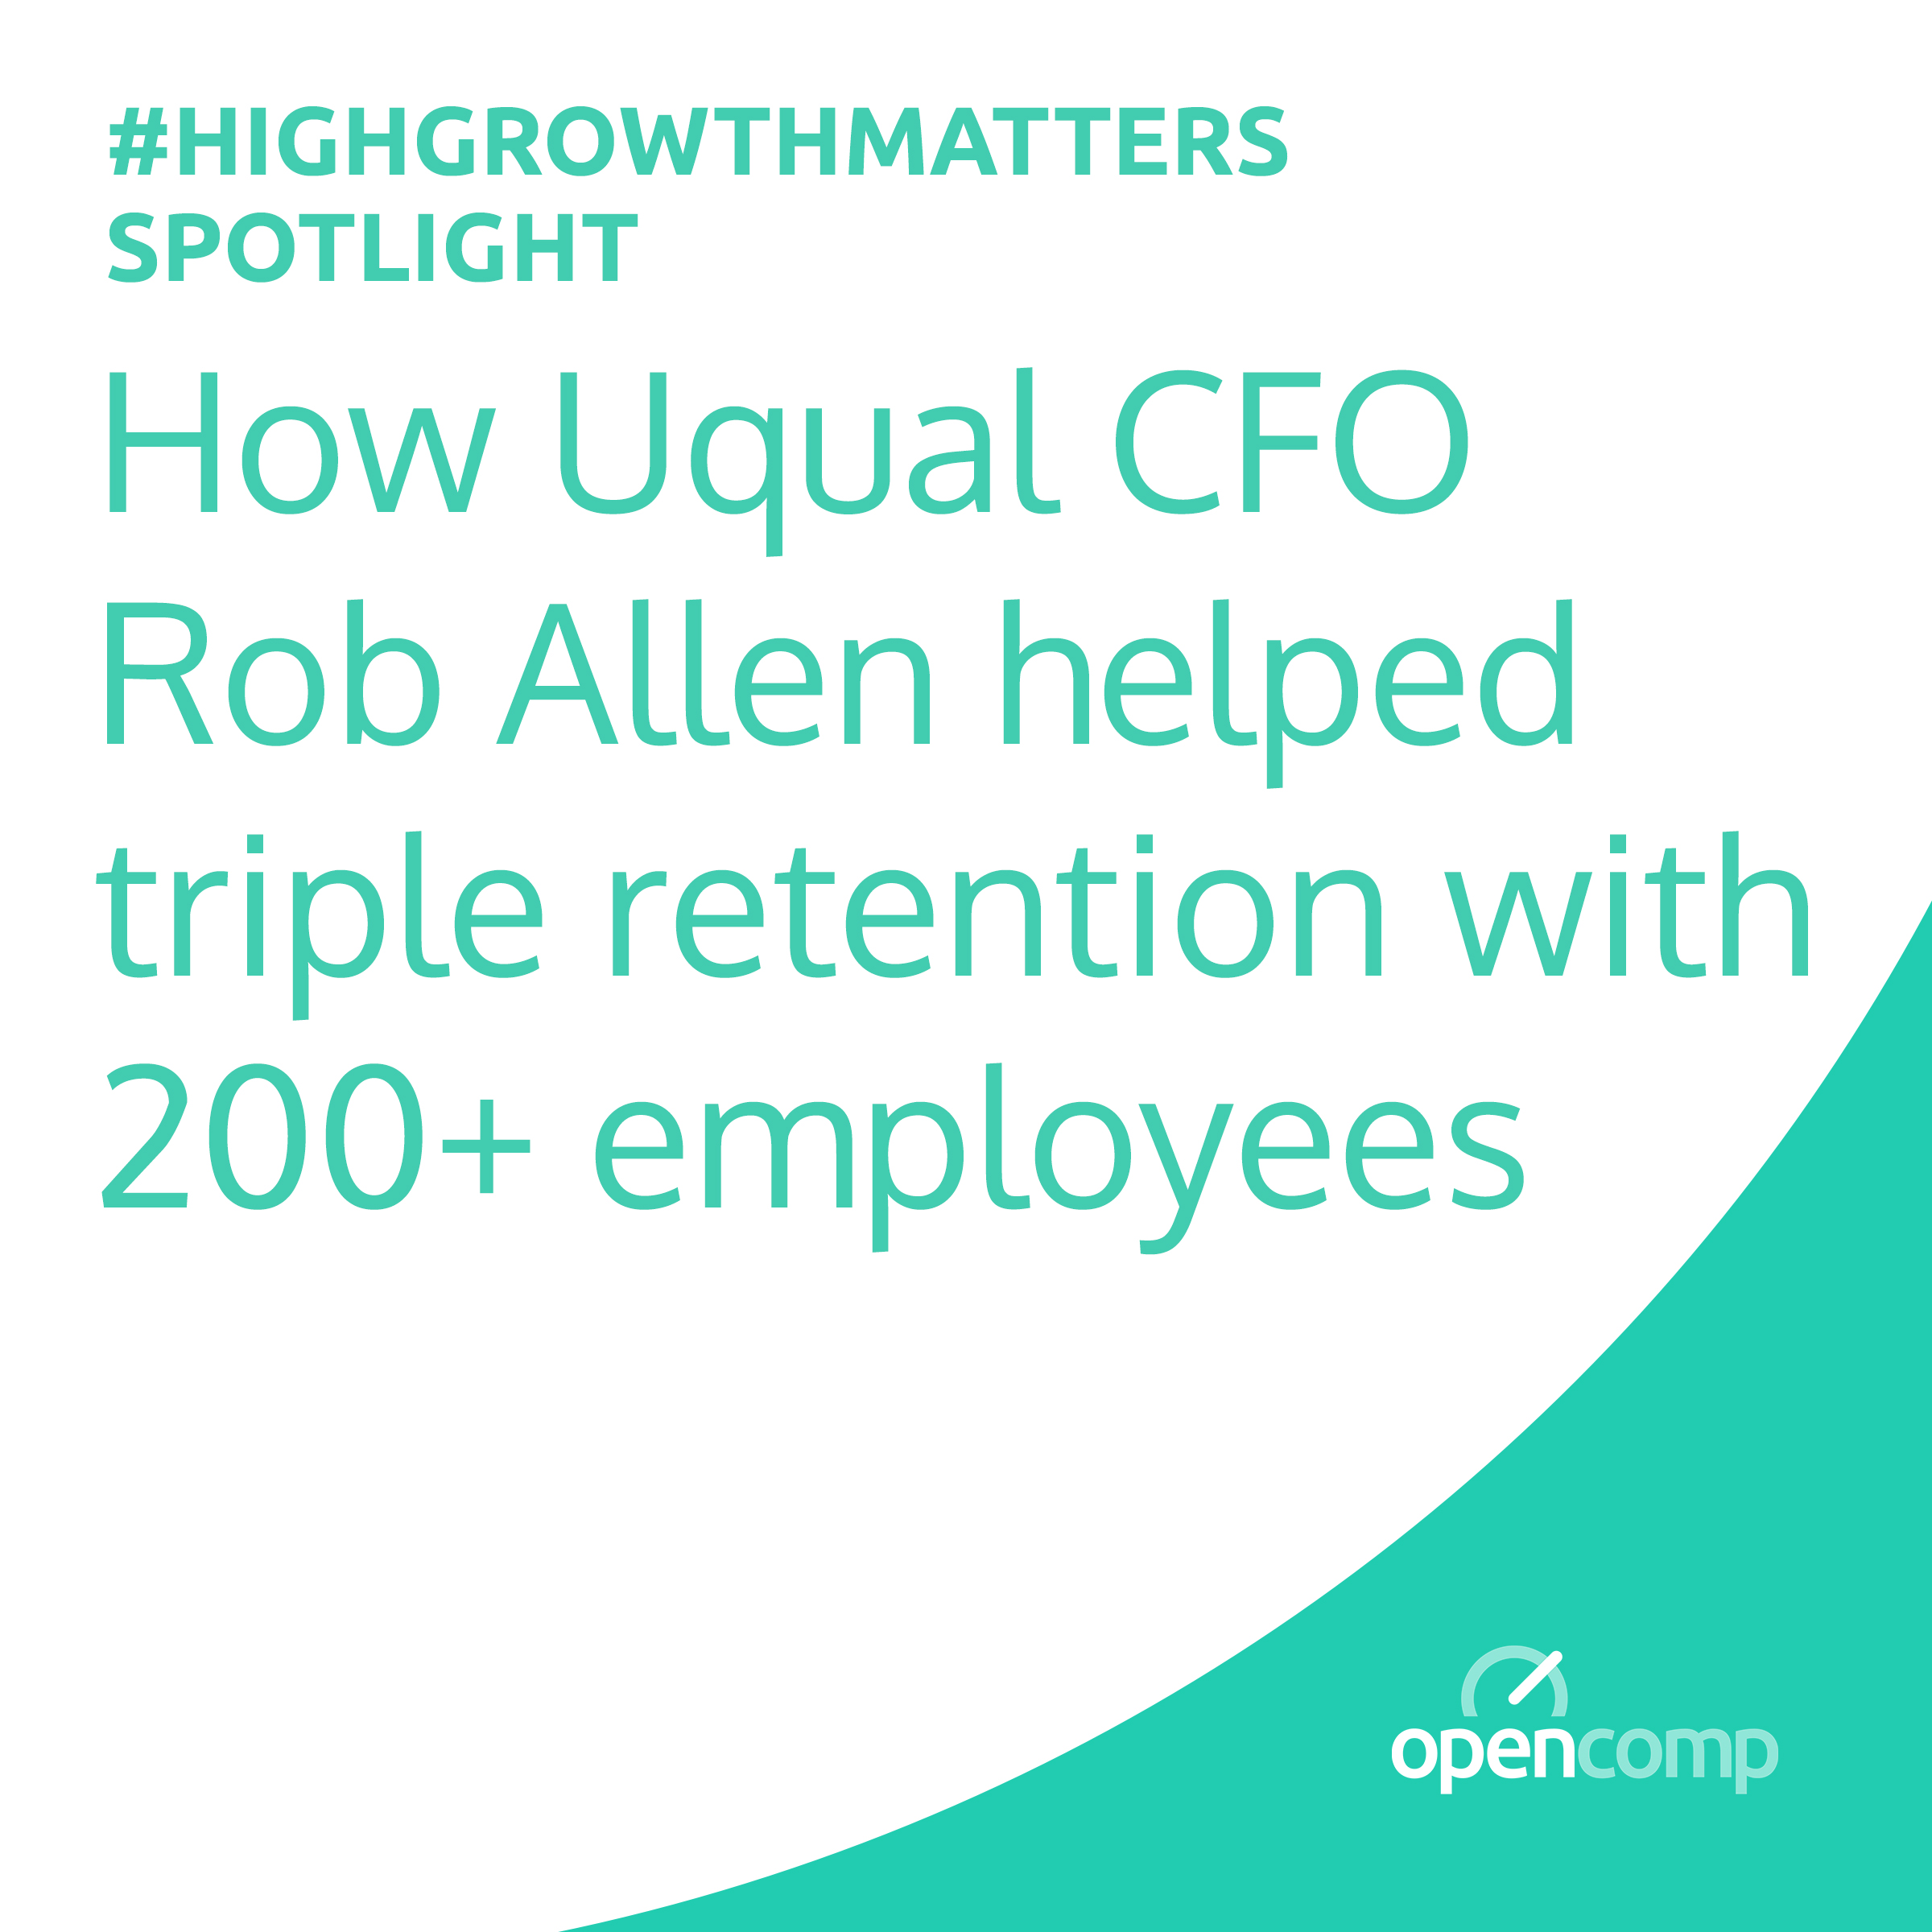 #HighGrowthMatters spotlight: How Uqual CFO Rob Allen helped triple retention with 200+ employees